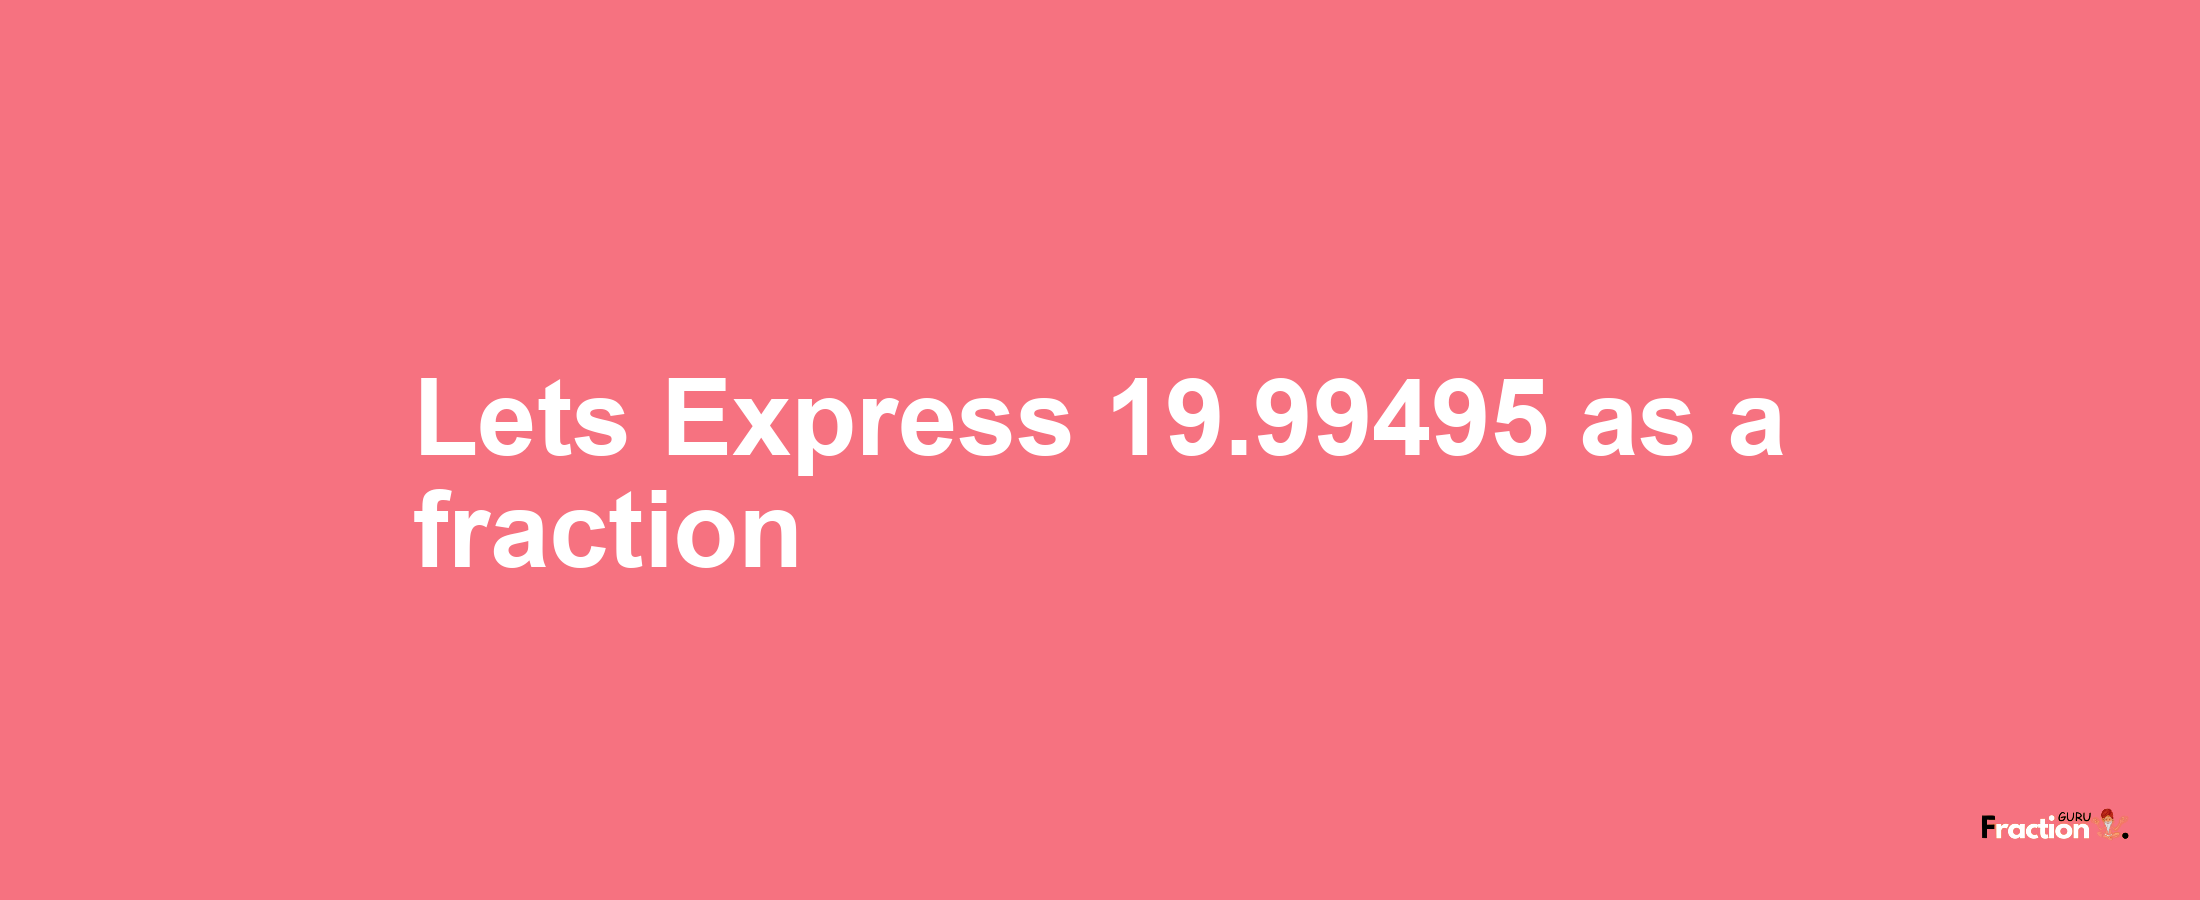 Lets Express 19.99495 as afraction